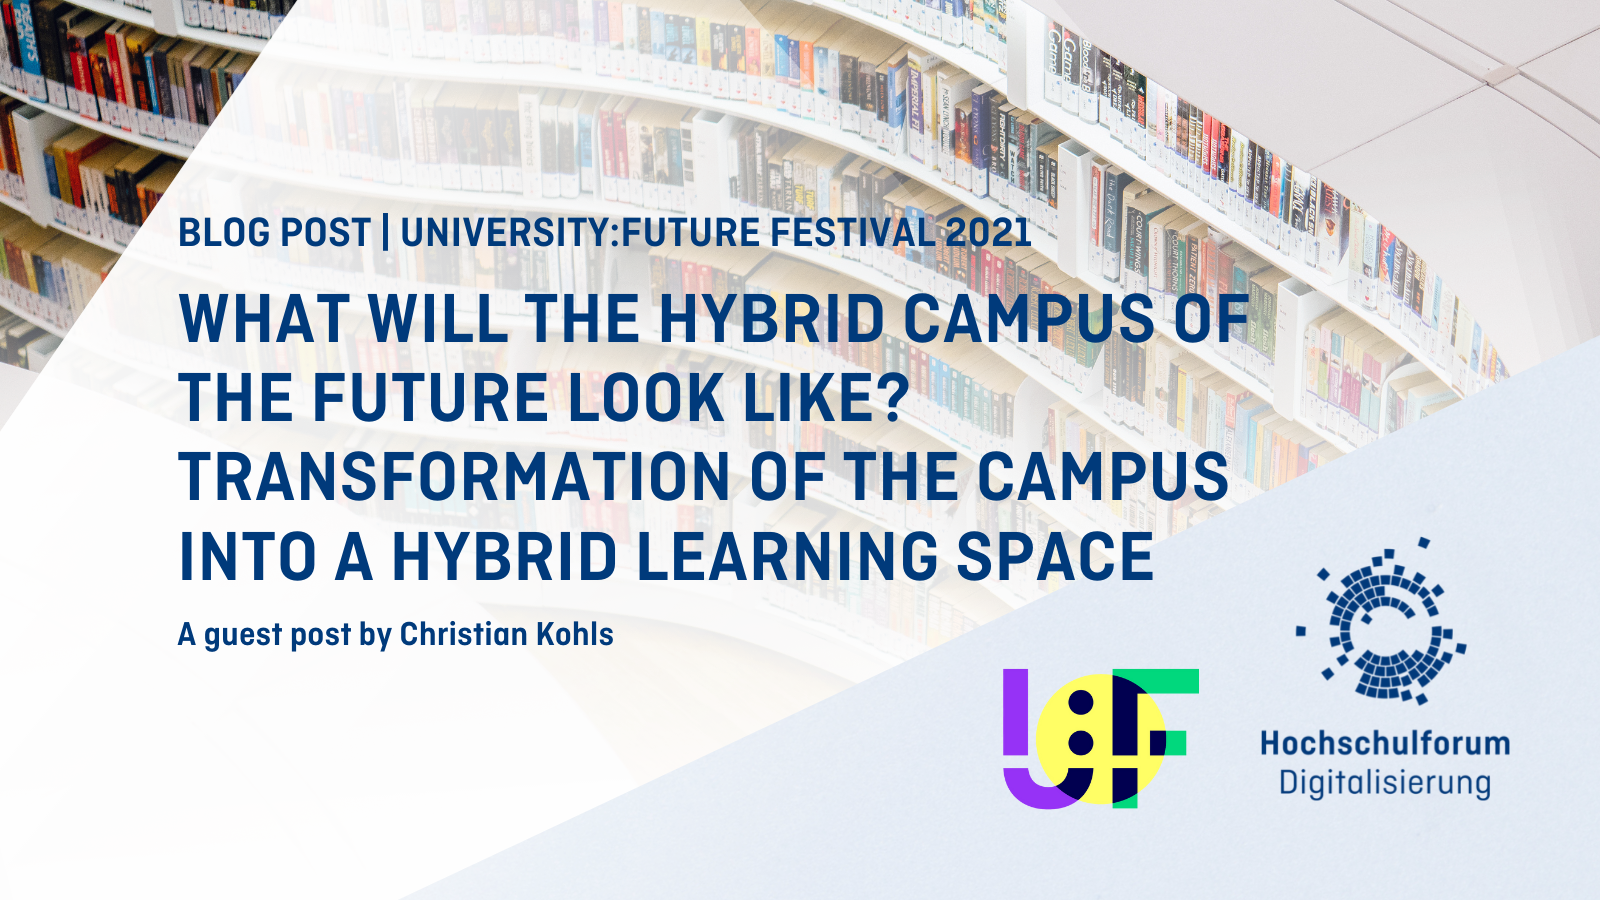 Background description: rows of bookshelves of a library, bottom right: Logo of the Univeristy: Future Festival 2021 and the University Forum on Digitization, text: BLOG POST | UNIVERSITY:FUTURE FESTIVAL 2021, What will the hybrid campus of the future look like? Transforming the campus into a hybrid learning space, A guest post by Christian Kohls